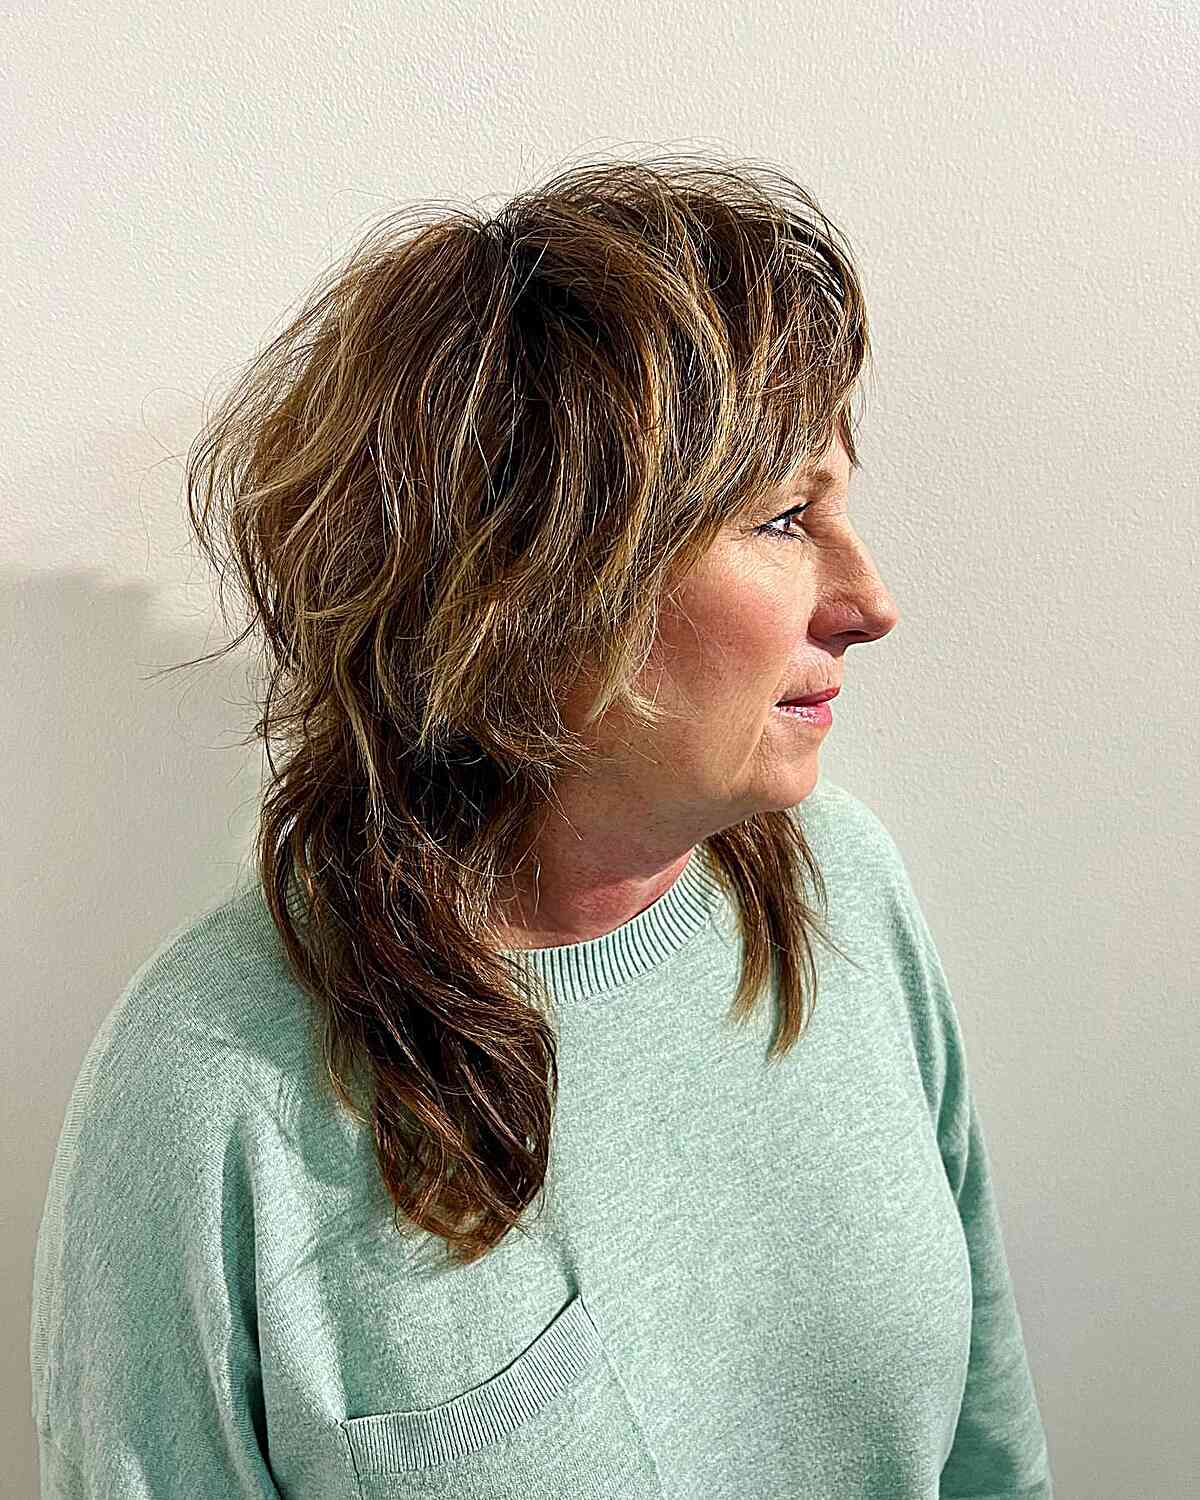 Collarbone-Length Shaggy Layered Mullet with Heavy Bangs for Older Ladies Over Sixty